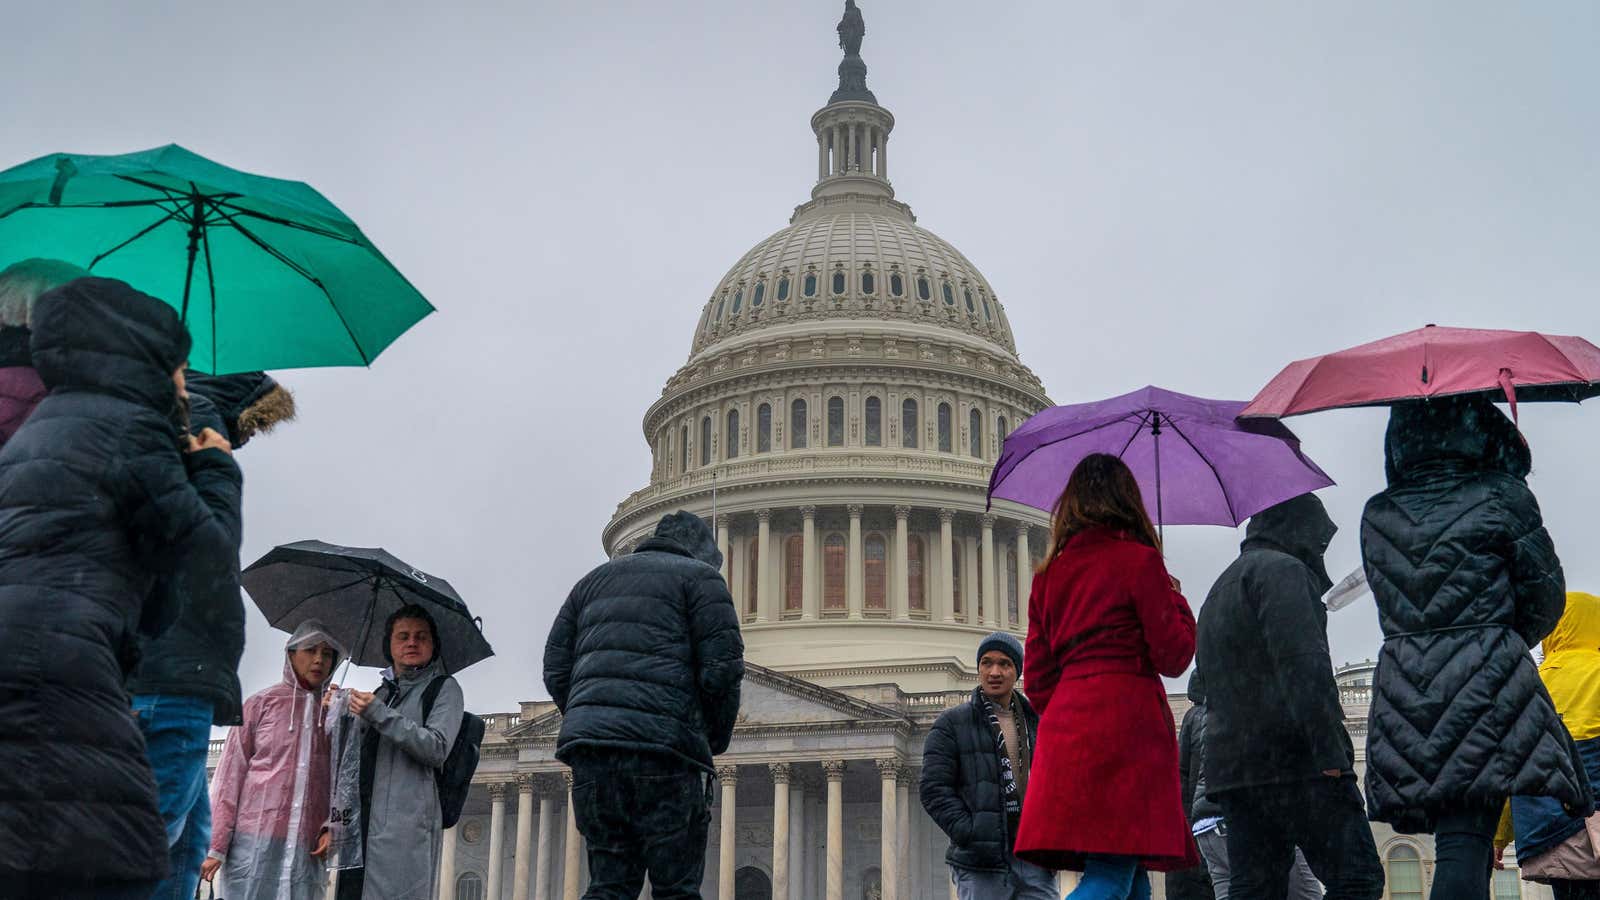 800,000 federal workers are currently on no-pay status due to the government shutdown.